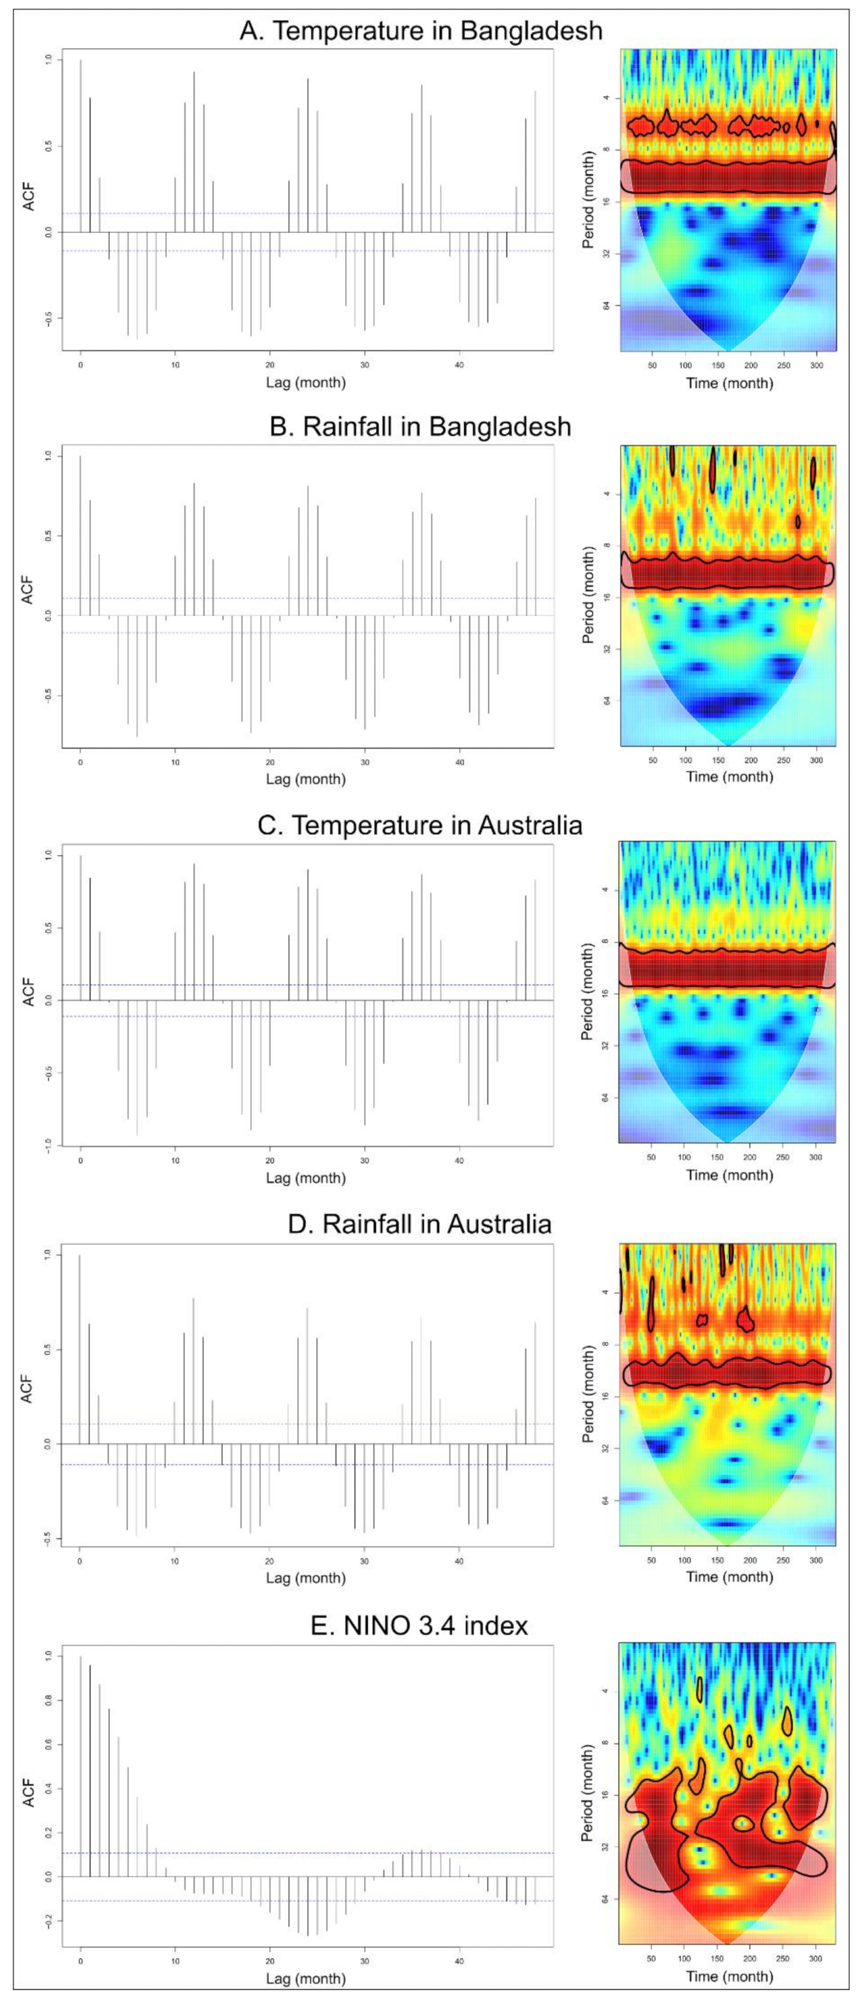 Time series and residual autocorrelation function (ACF) with significant auto-correlation values in dashed lines (left column) and wavelet power spectrum (right column) from January 1993 to June 2020 (330 months) of (A) monthly temperature in Bangladesh, (B) monthly rainfall in Bangladesh, (C) monthly temperature in Australia, (D) monthly rainfall in Australia, and (E) NINO 3.4 index values decomposed in smooth trend and seasonal effect. Wavelet power values increased from blue to red, and black contour lines indicate a 5% significance level.